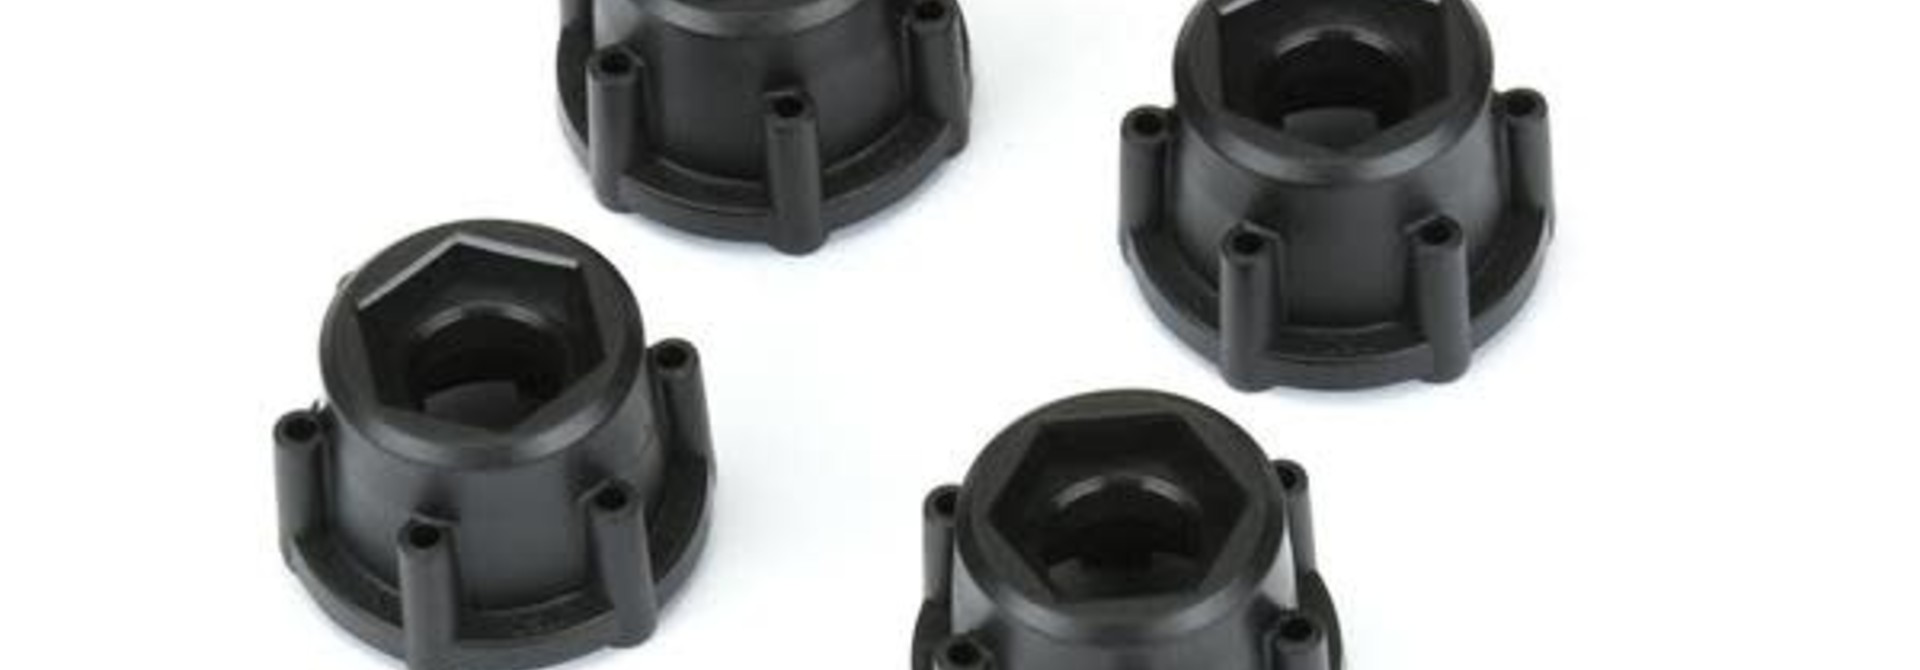 6x30 to 17mm Hex Adapters for 6x30 2.8" Wheels